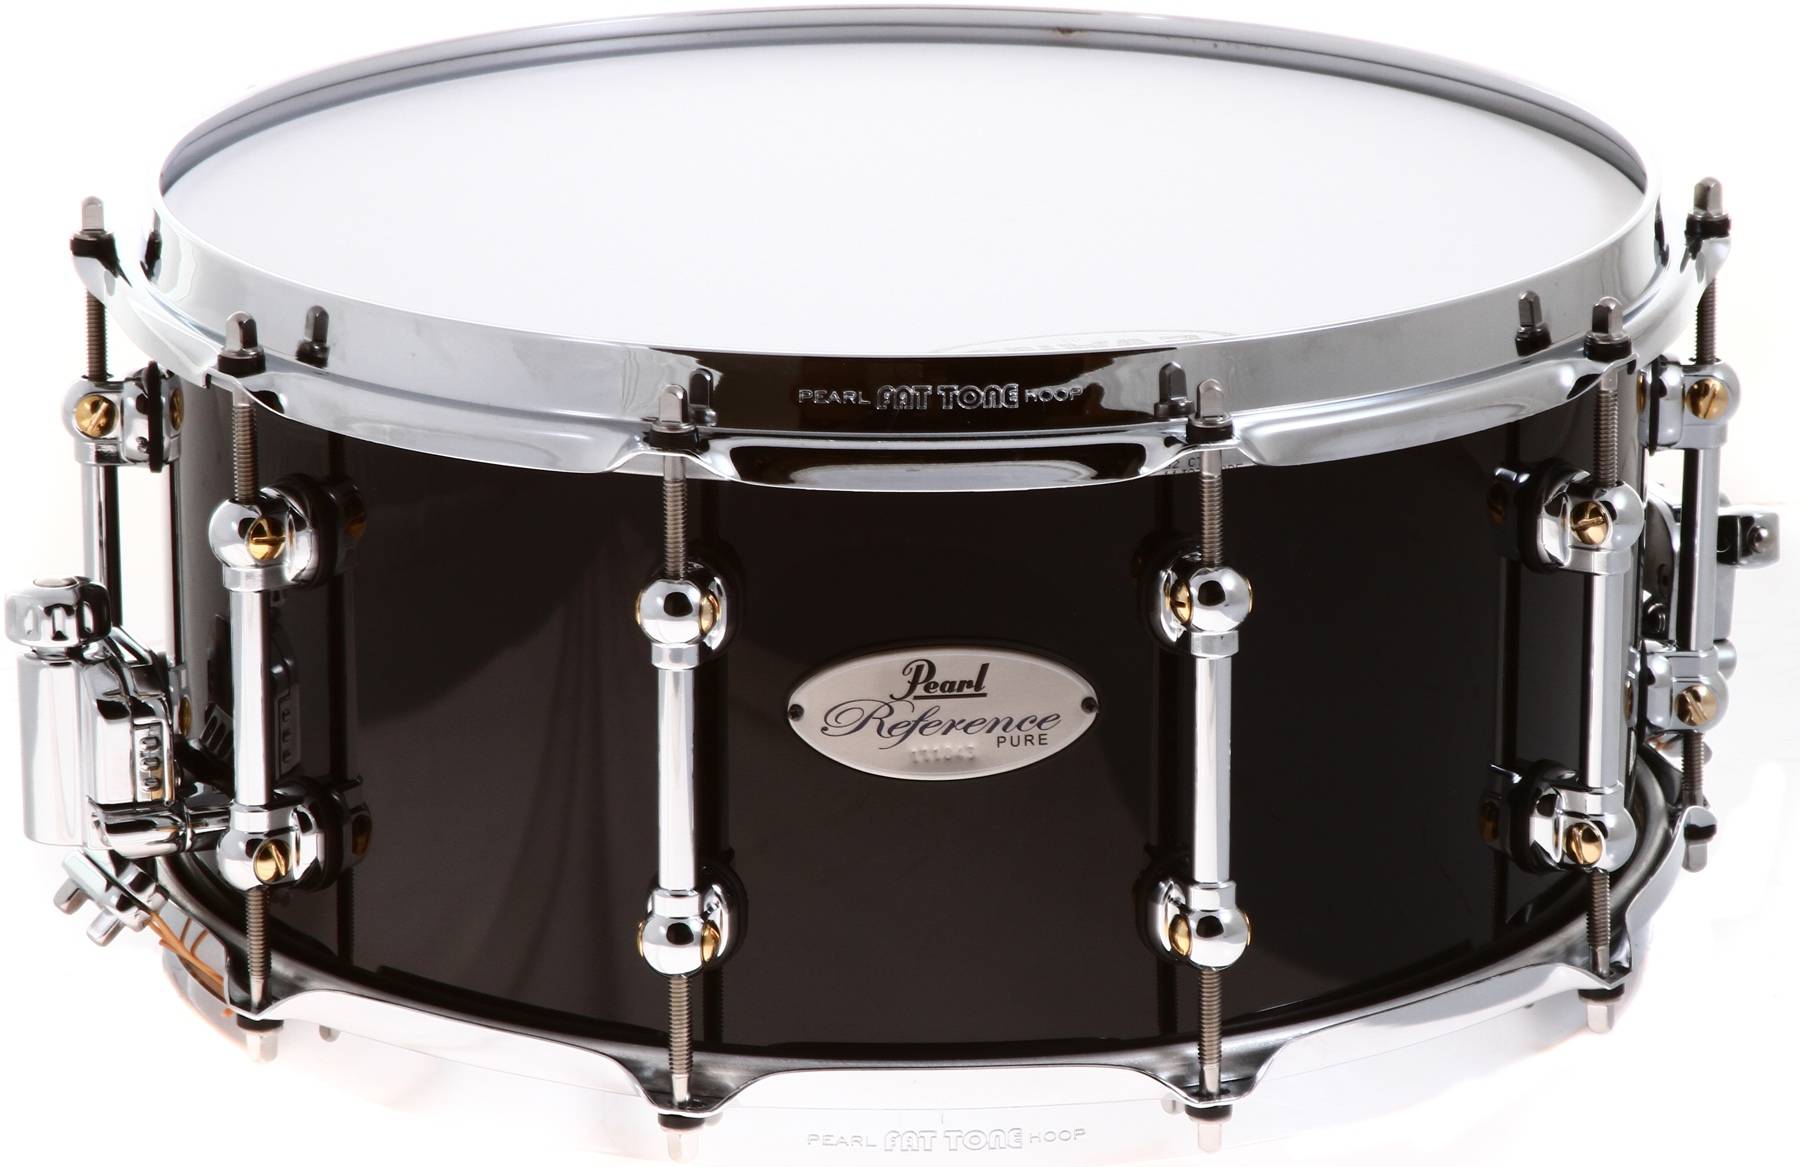 Pearl RF1465S Reference Piano Black Snare